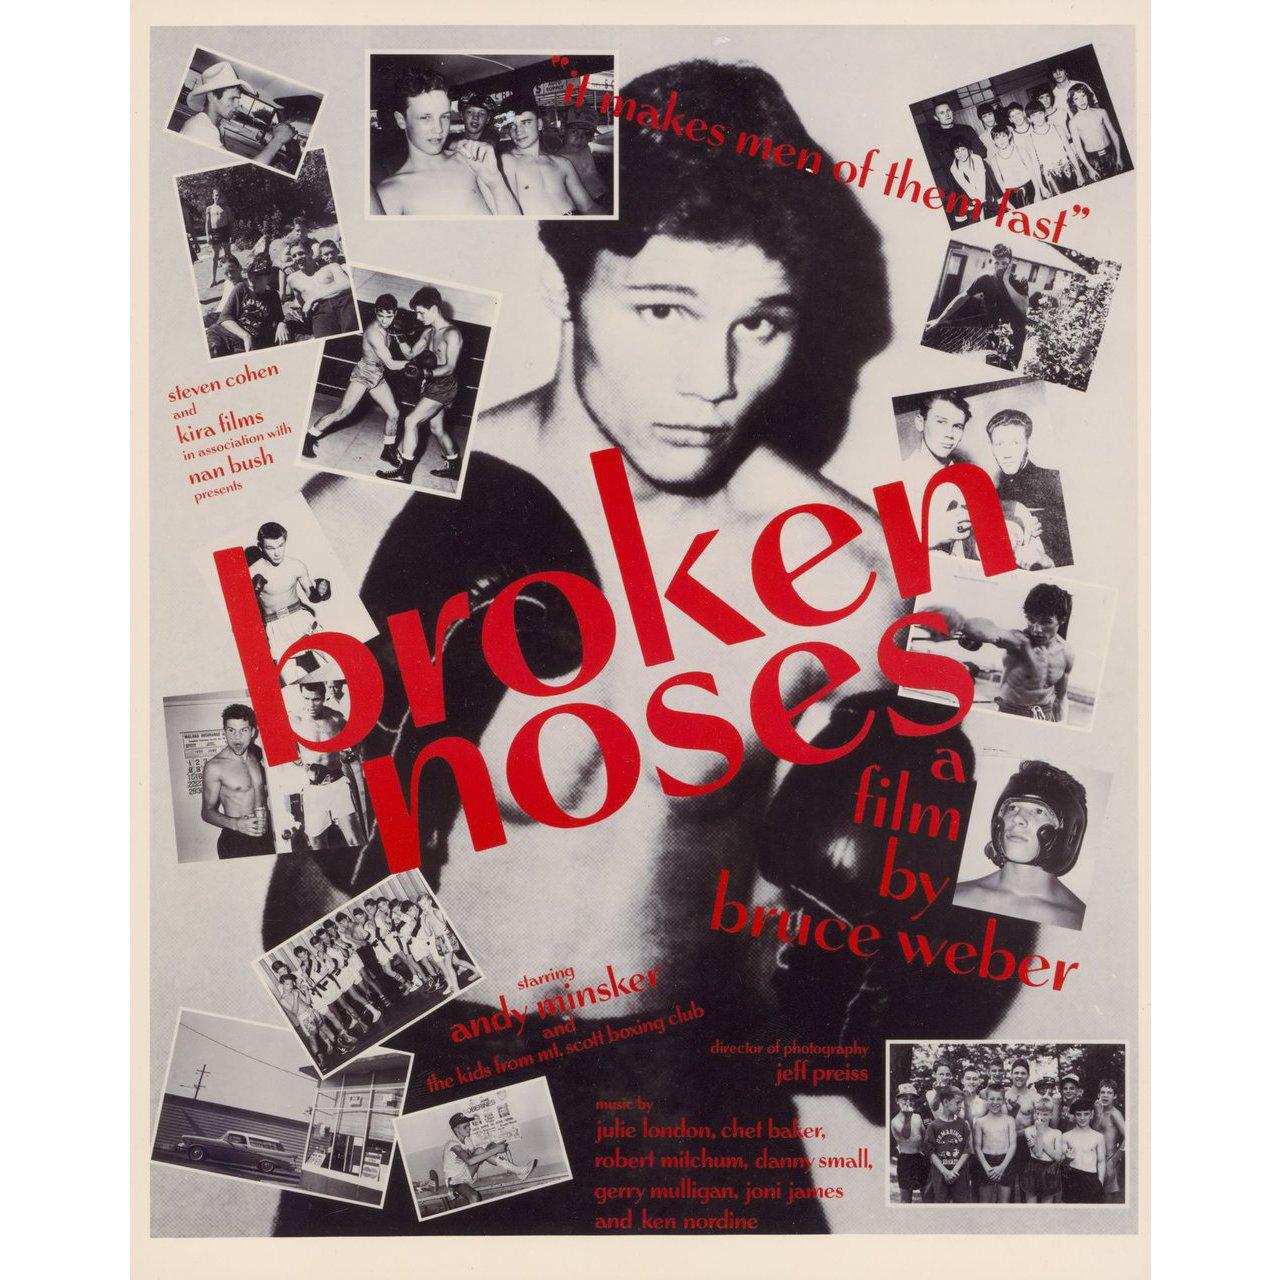 Original 1987 U.S. color photo for the documentary film Broken Noses directed by Bruce Weber with Andy Minsker / Sean Bedwell / Aaron Berry / Warren Bressler. Fine condition. Please note: the size is stated in inches and the actual size can vary by